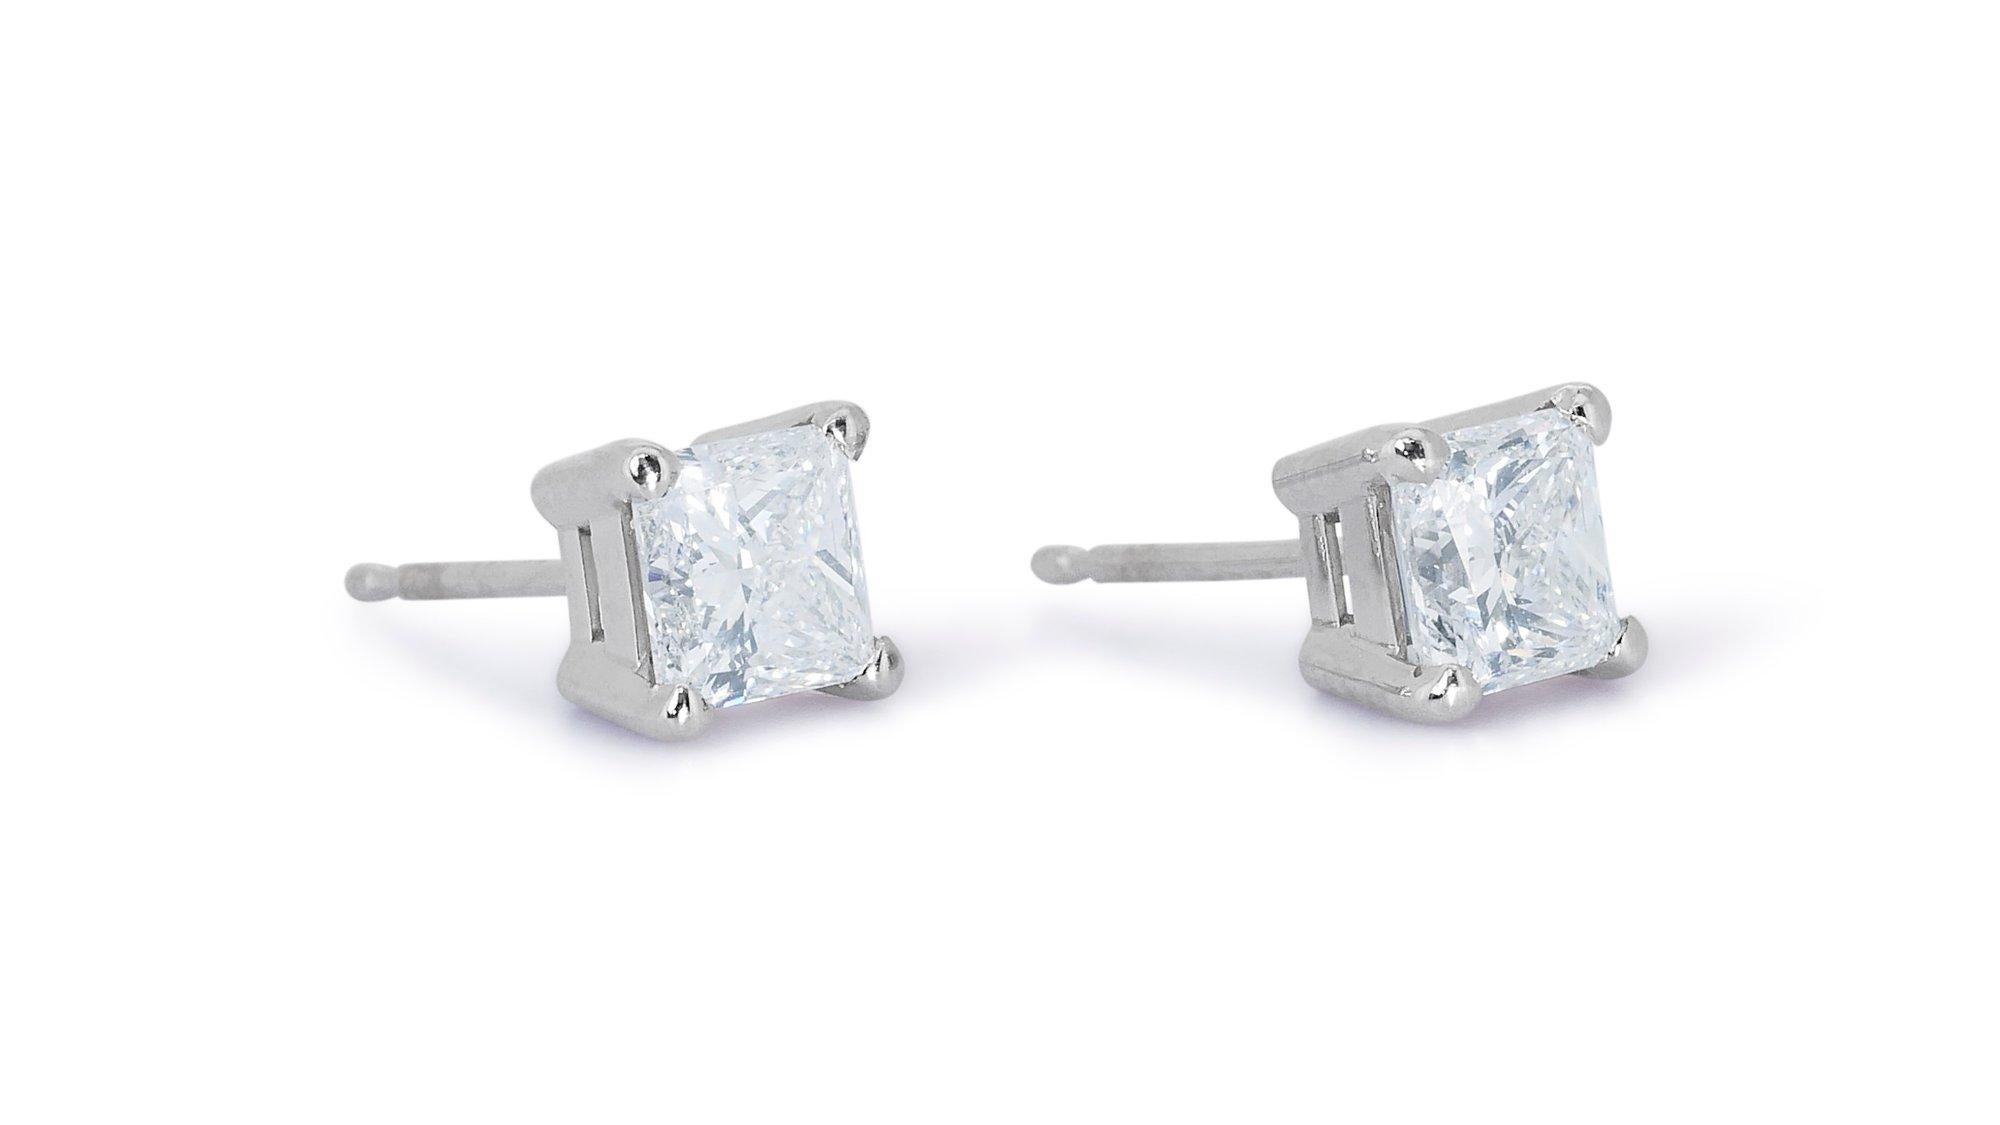 Classic 2.00ct Diamond Stud Earrings in 18k White Gold - GIA Certified

Experience elegance with these stunning diamond stud earrings crafted from 18k white gold. Each earring showcases a sparkling square diamond with a total carat weight of